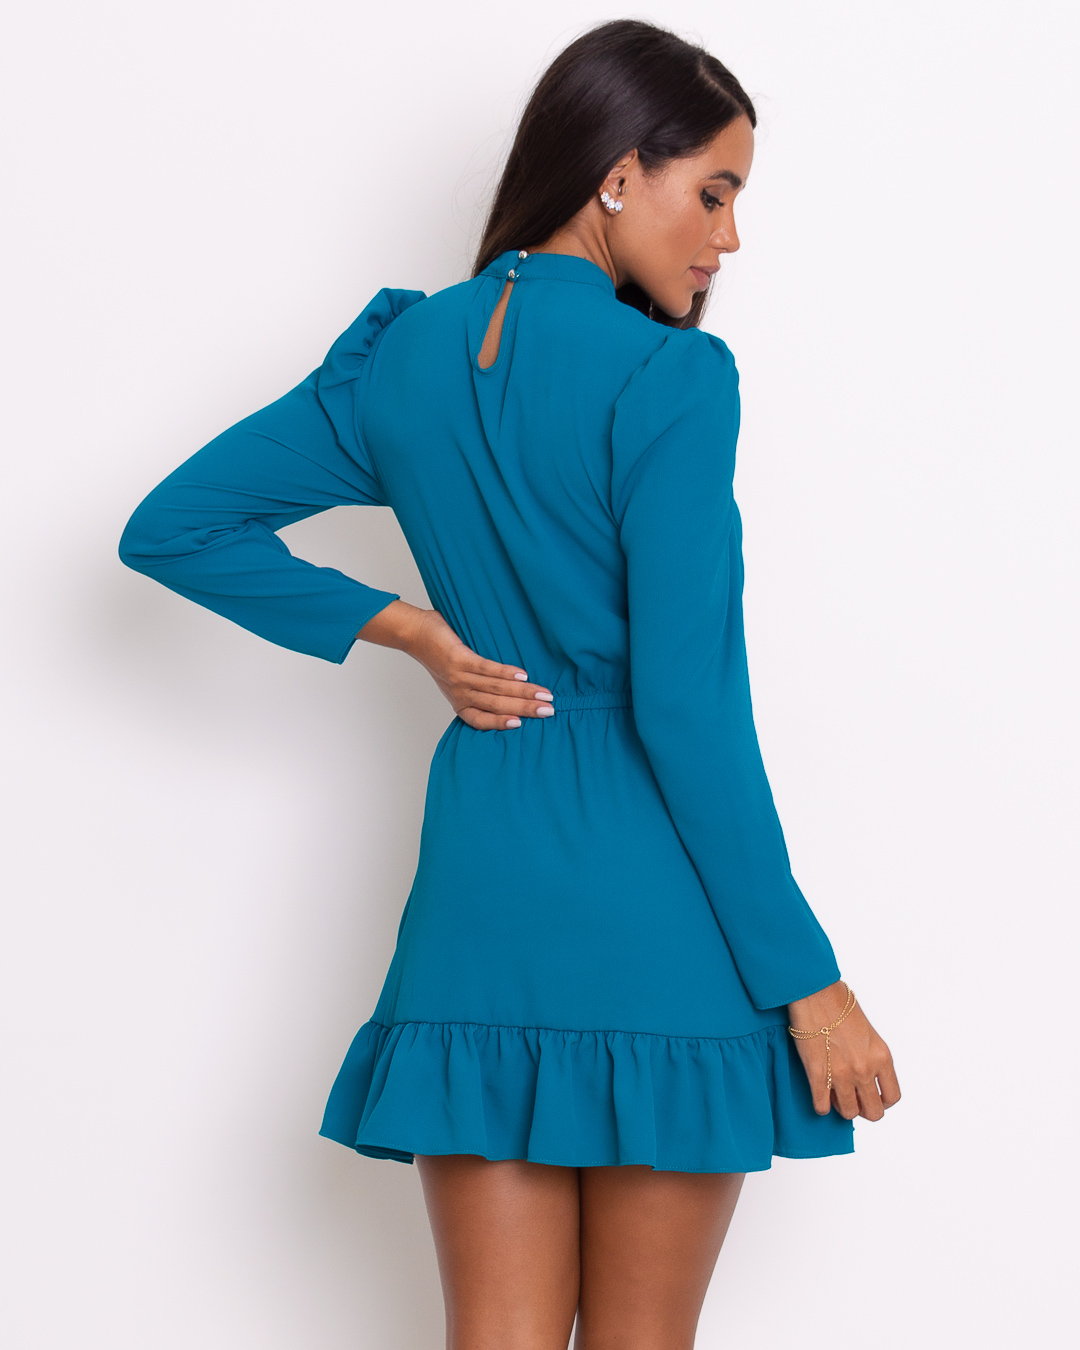 Miss Misses - Dress Miss Misses workout wheeldo Ruched Long Sleeve With Belt Blue - 18821AZUL